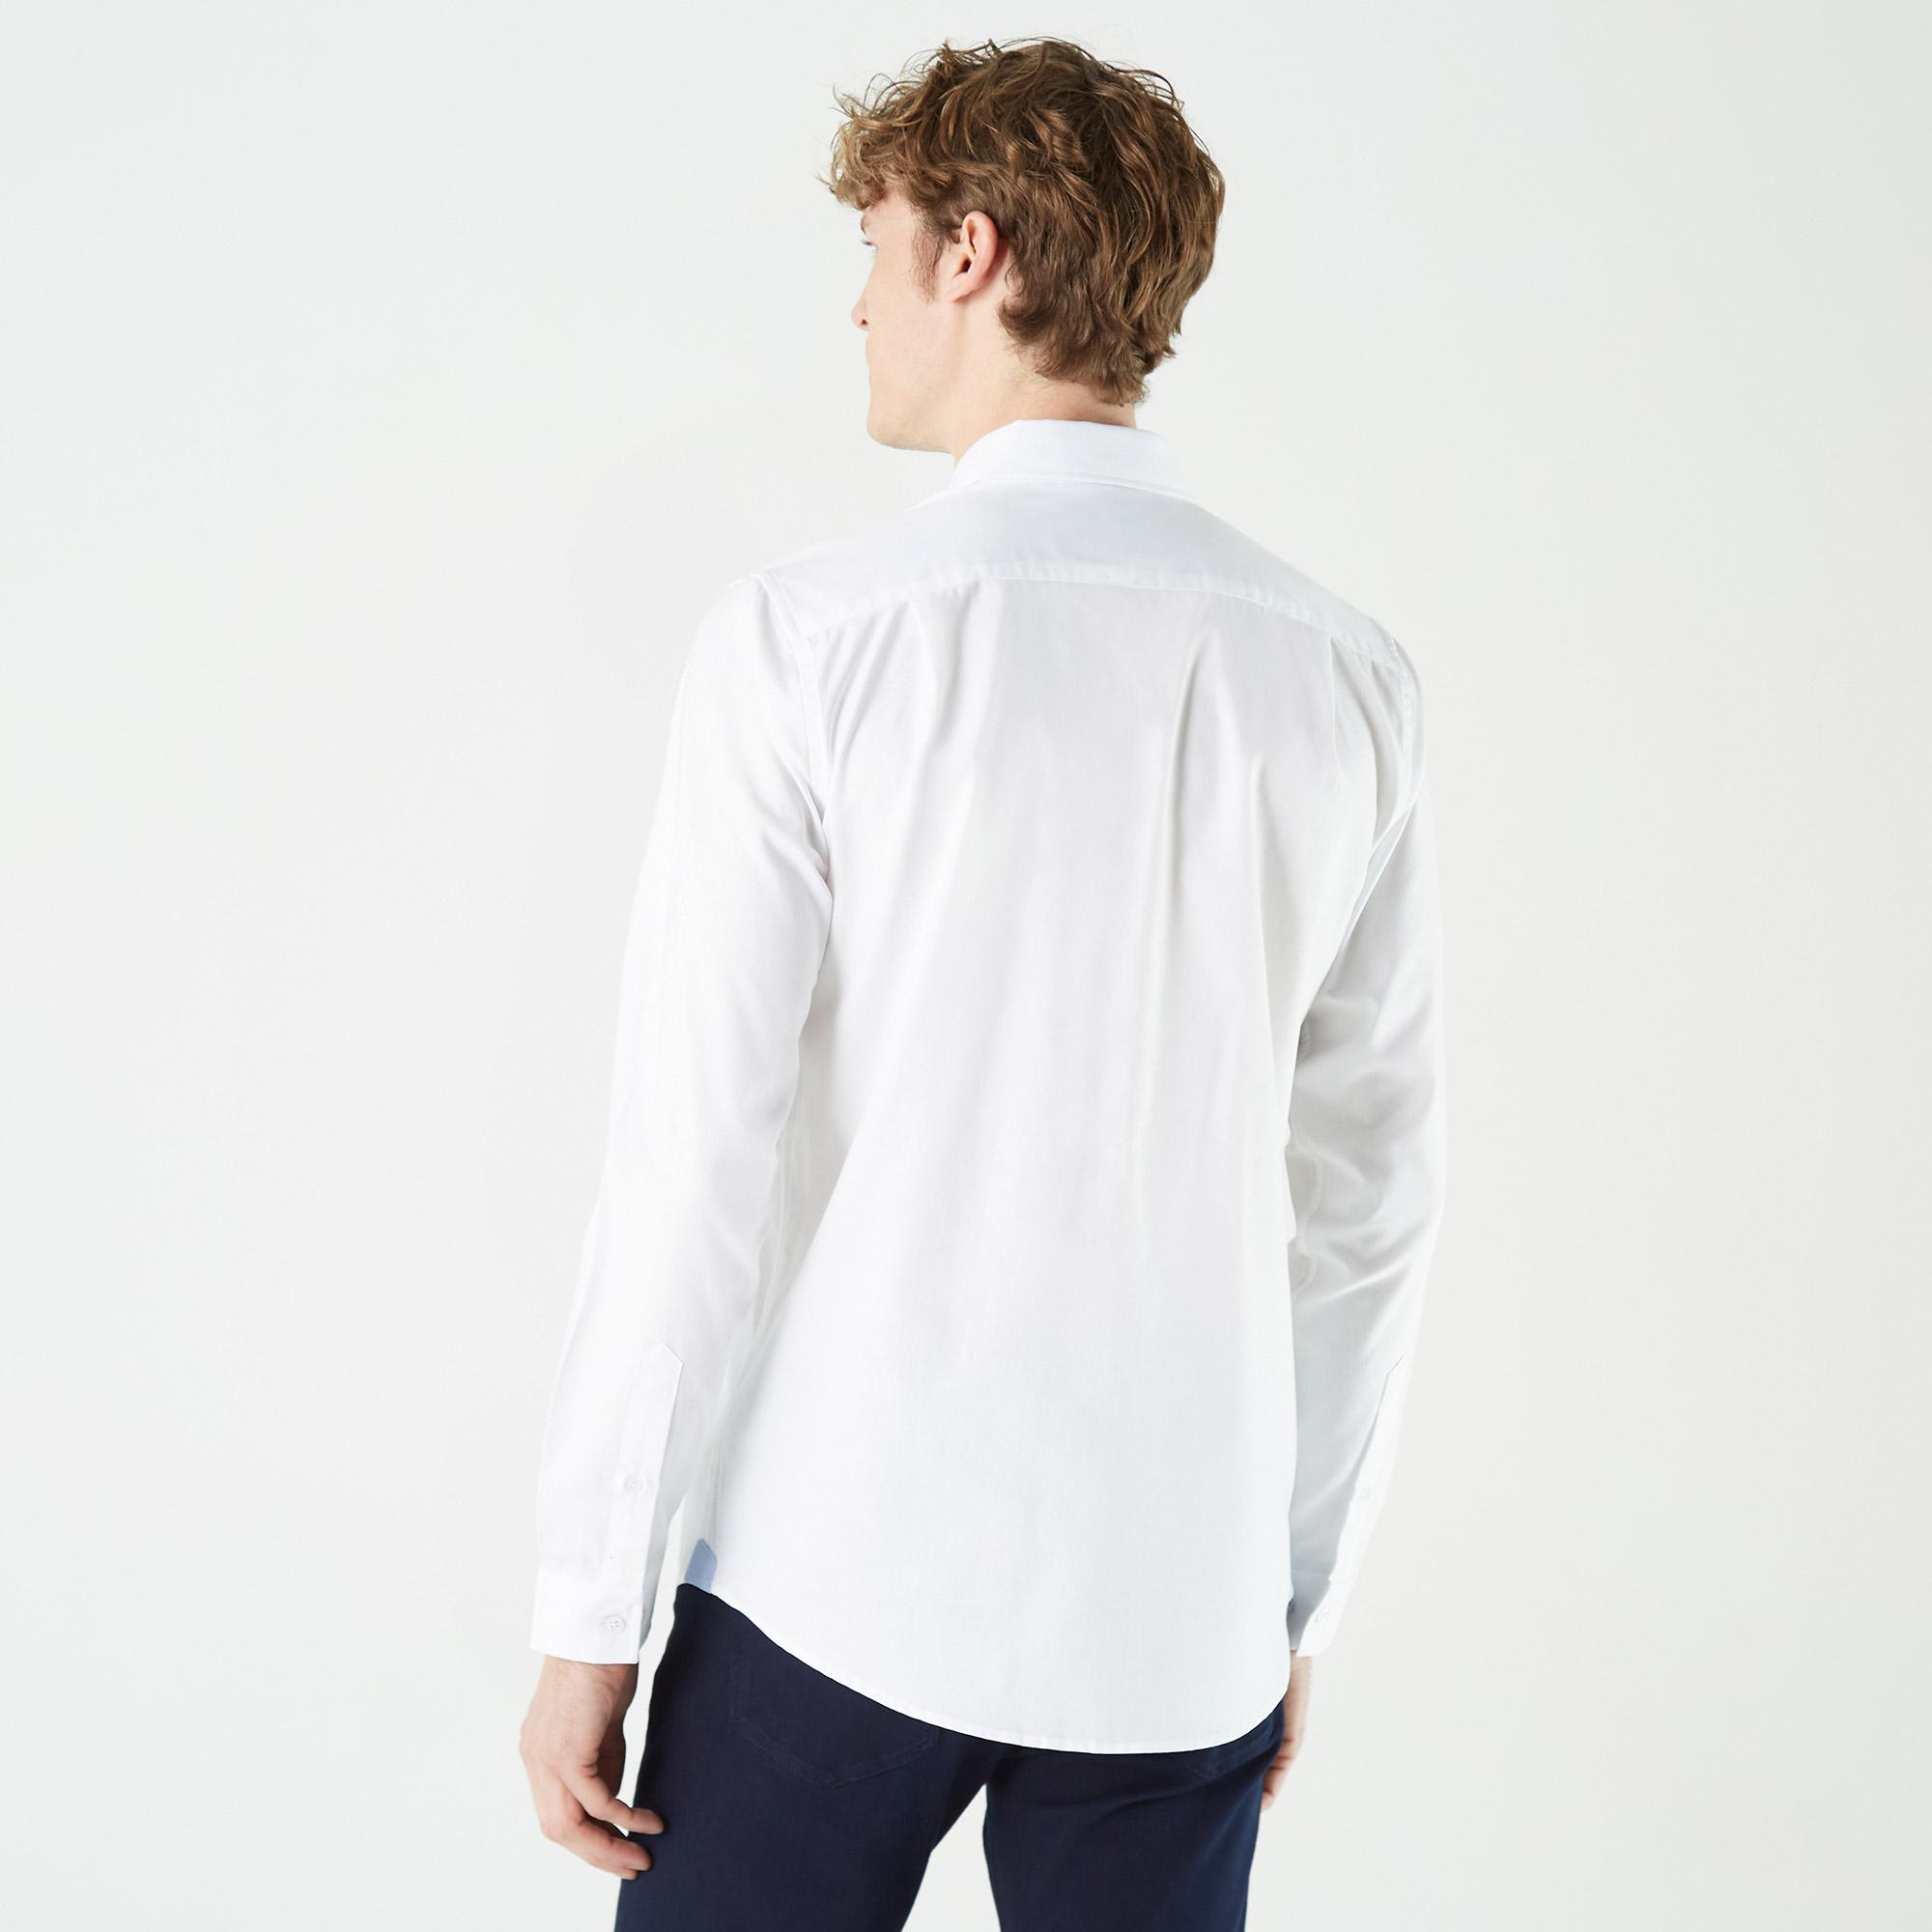 Lacoste Mens Long Sleeve Shirt CH4976-00 White 40